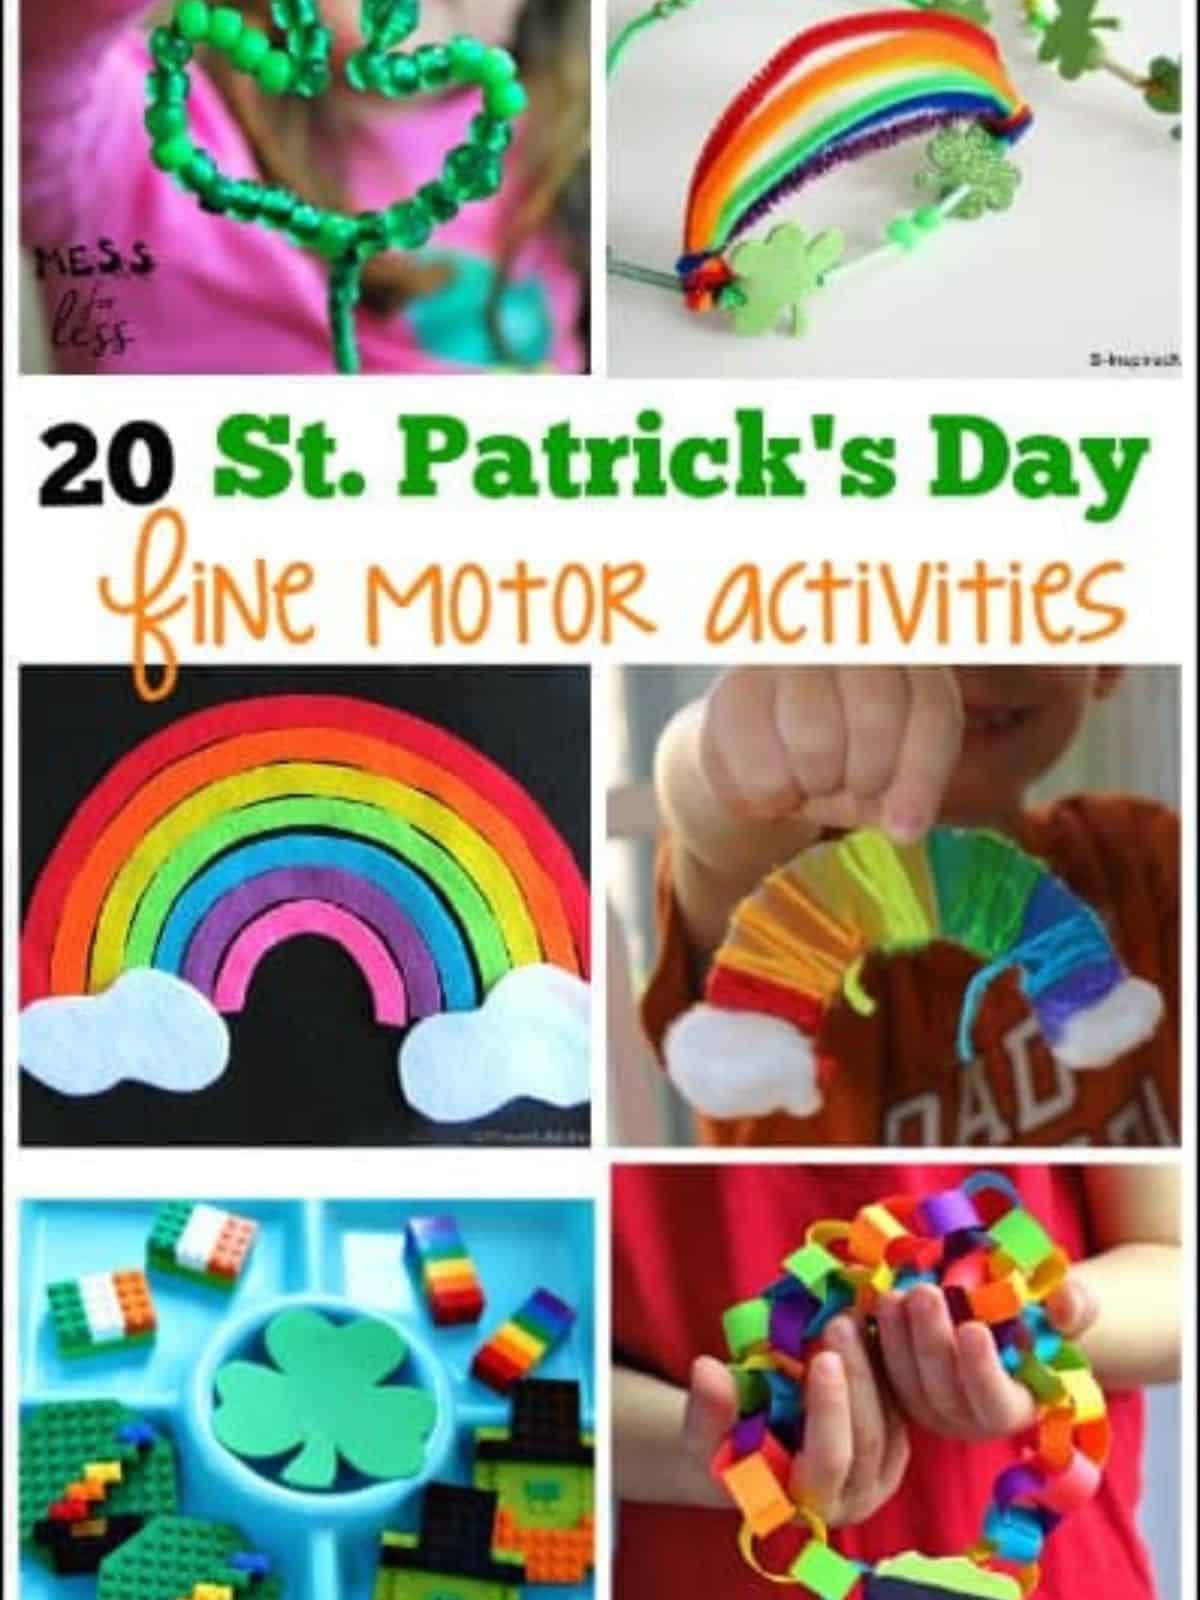 These Kids Fine Motor Activities for St. Patrick's Day are fun and work on an important skill.